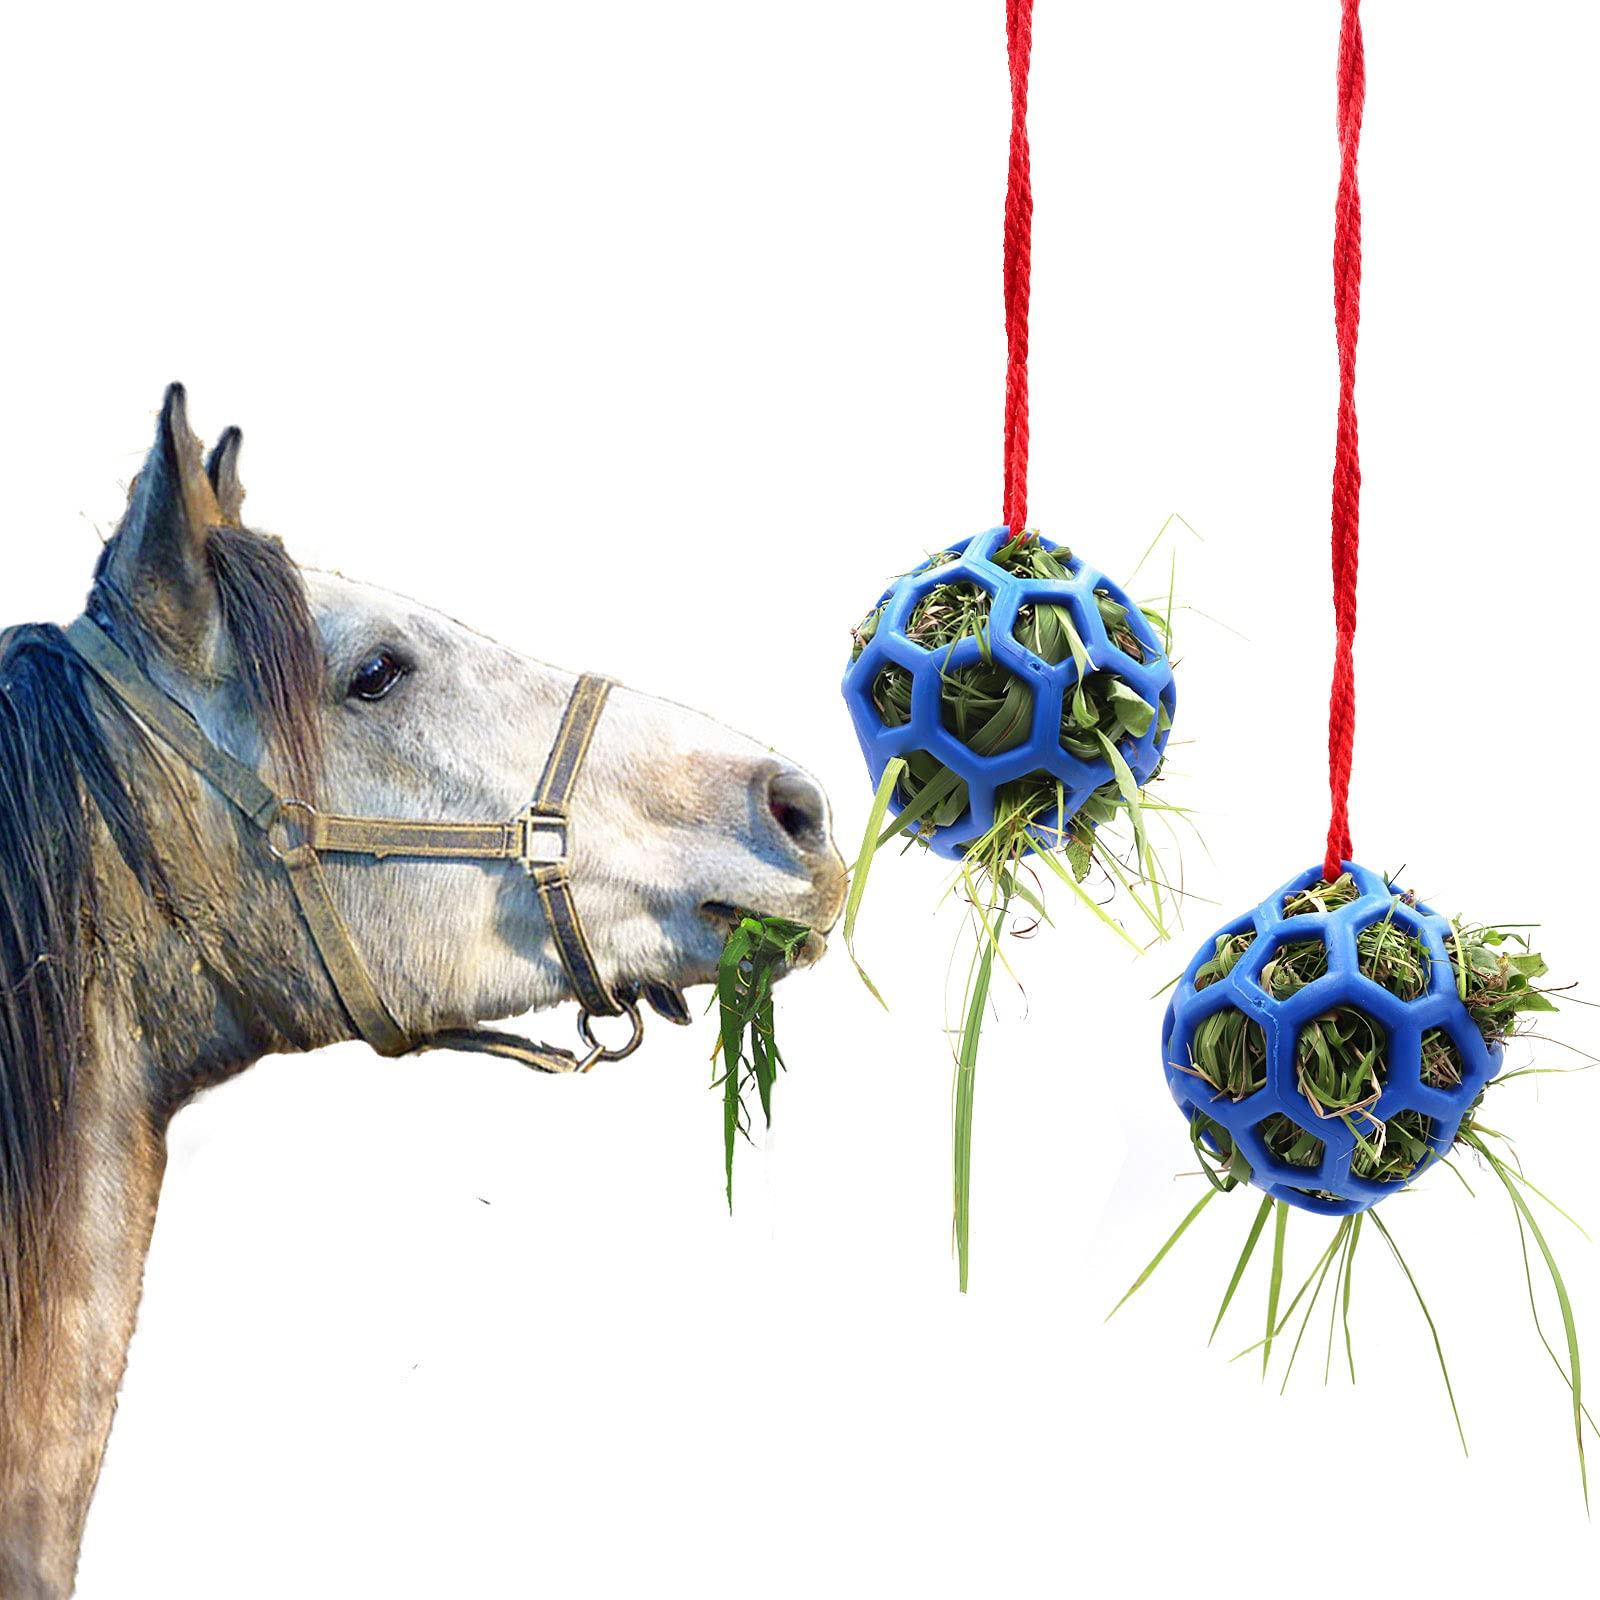 Besimple 2 Pack Horse Treat Ball Hay Feeder Toy, Goat Feeder Ball Hanging Feeding Toy for Horse Goat Sheep Relieve Stress(Blue)